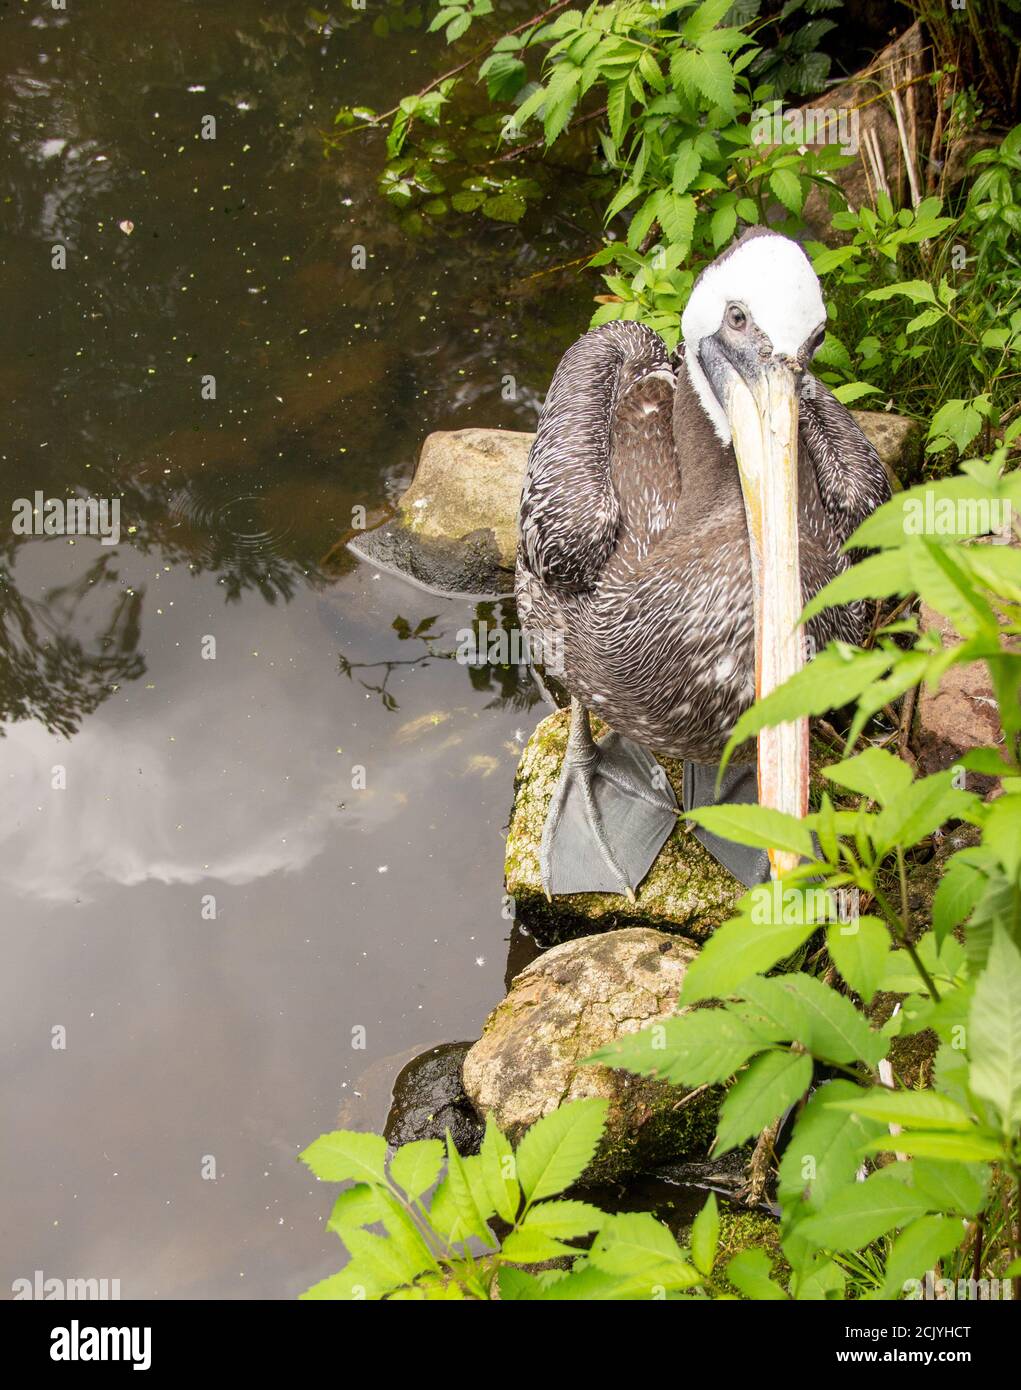 View of a brown pelican standing on the shore, Pelecanus occidentalis, is a bird in the pelican family, Pelecanidae Stock Photo